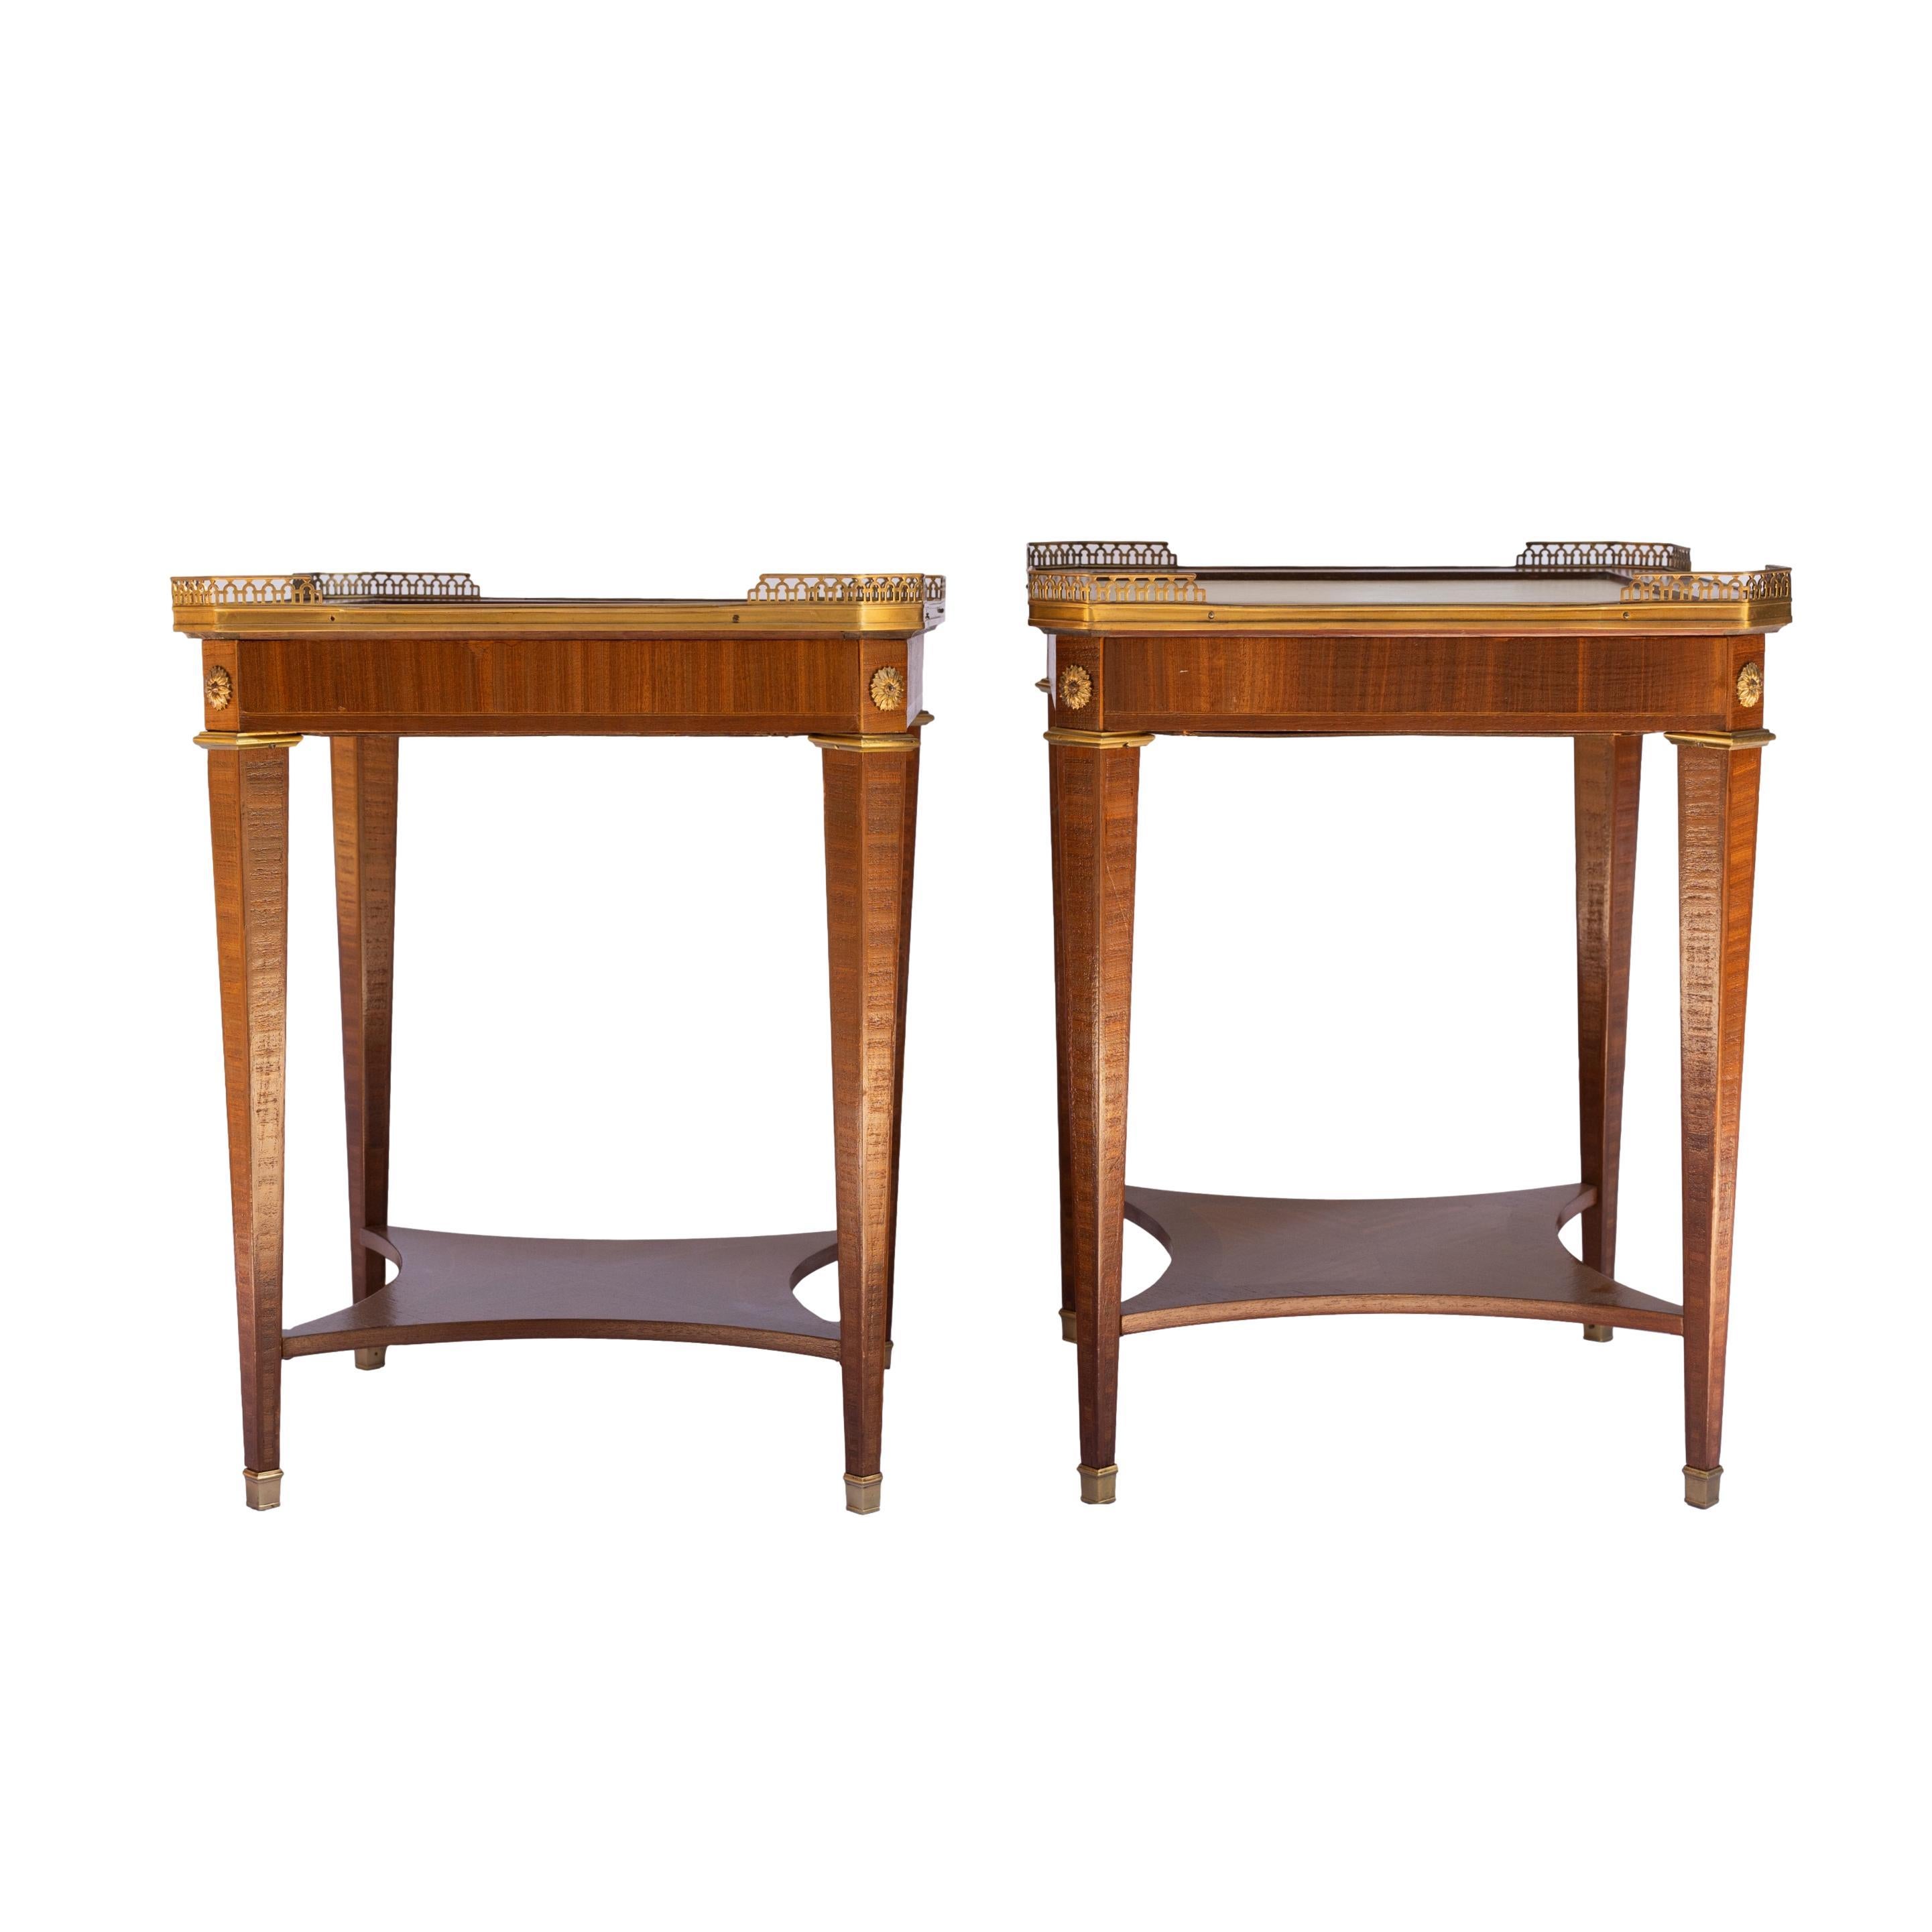 A Pair of Mahogany Directoire-stye side tables with bronze ormolu mounts and gallery, with tooled leather top, and shaped shelf below, on tapered legs terminating in bronze sabots, French, ca. 1920.  